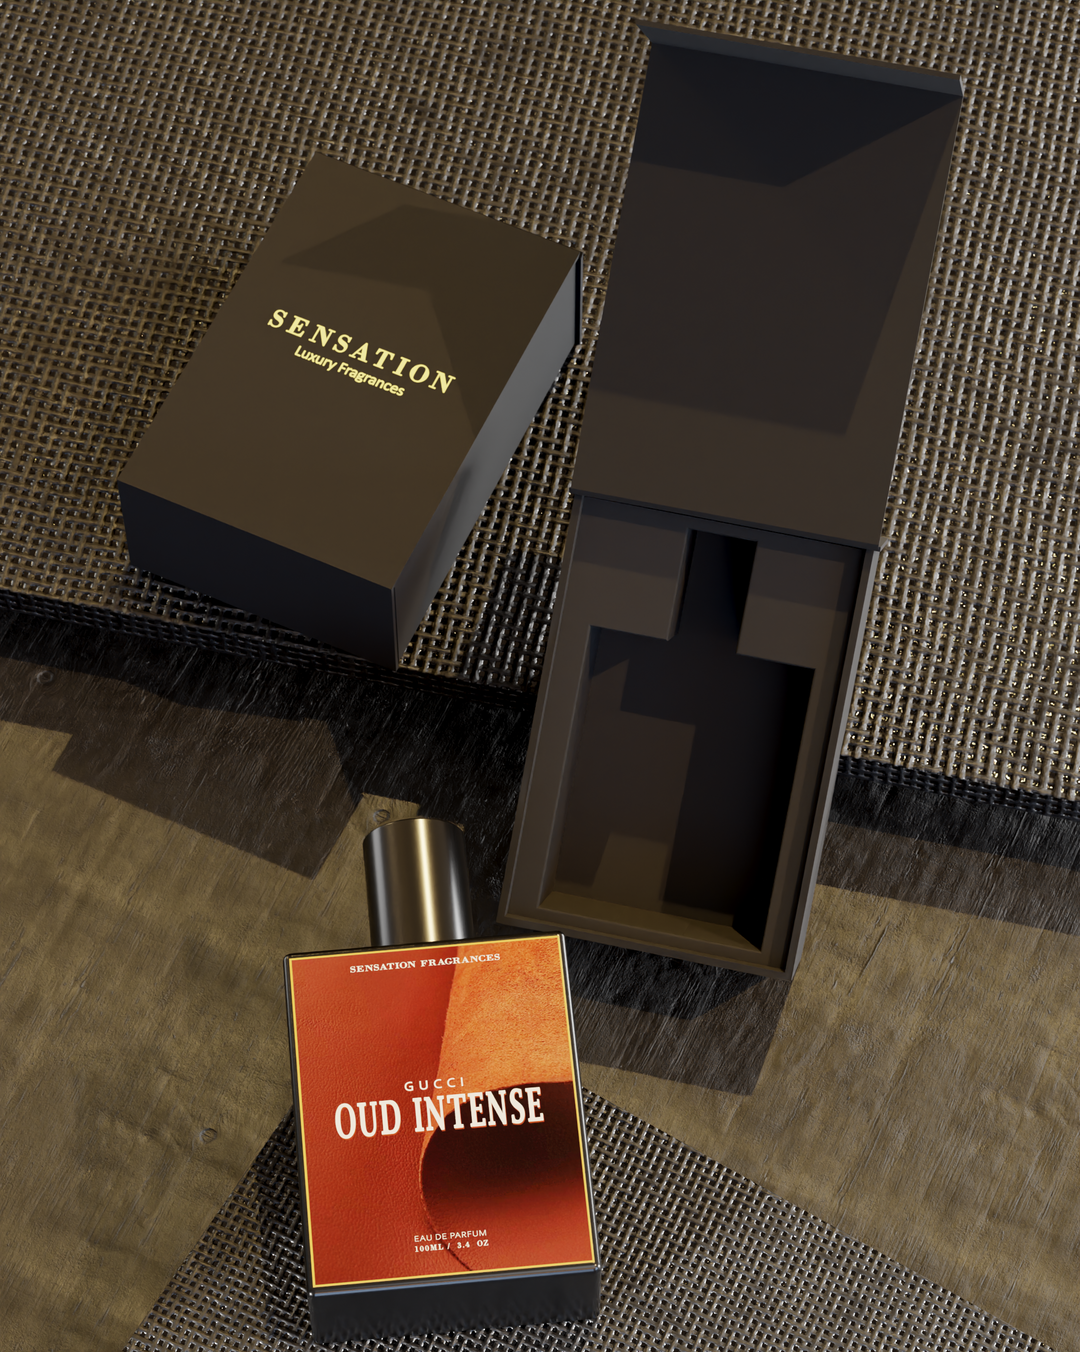 Our Impression of Oud Intense